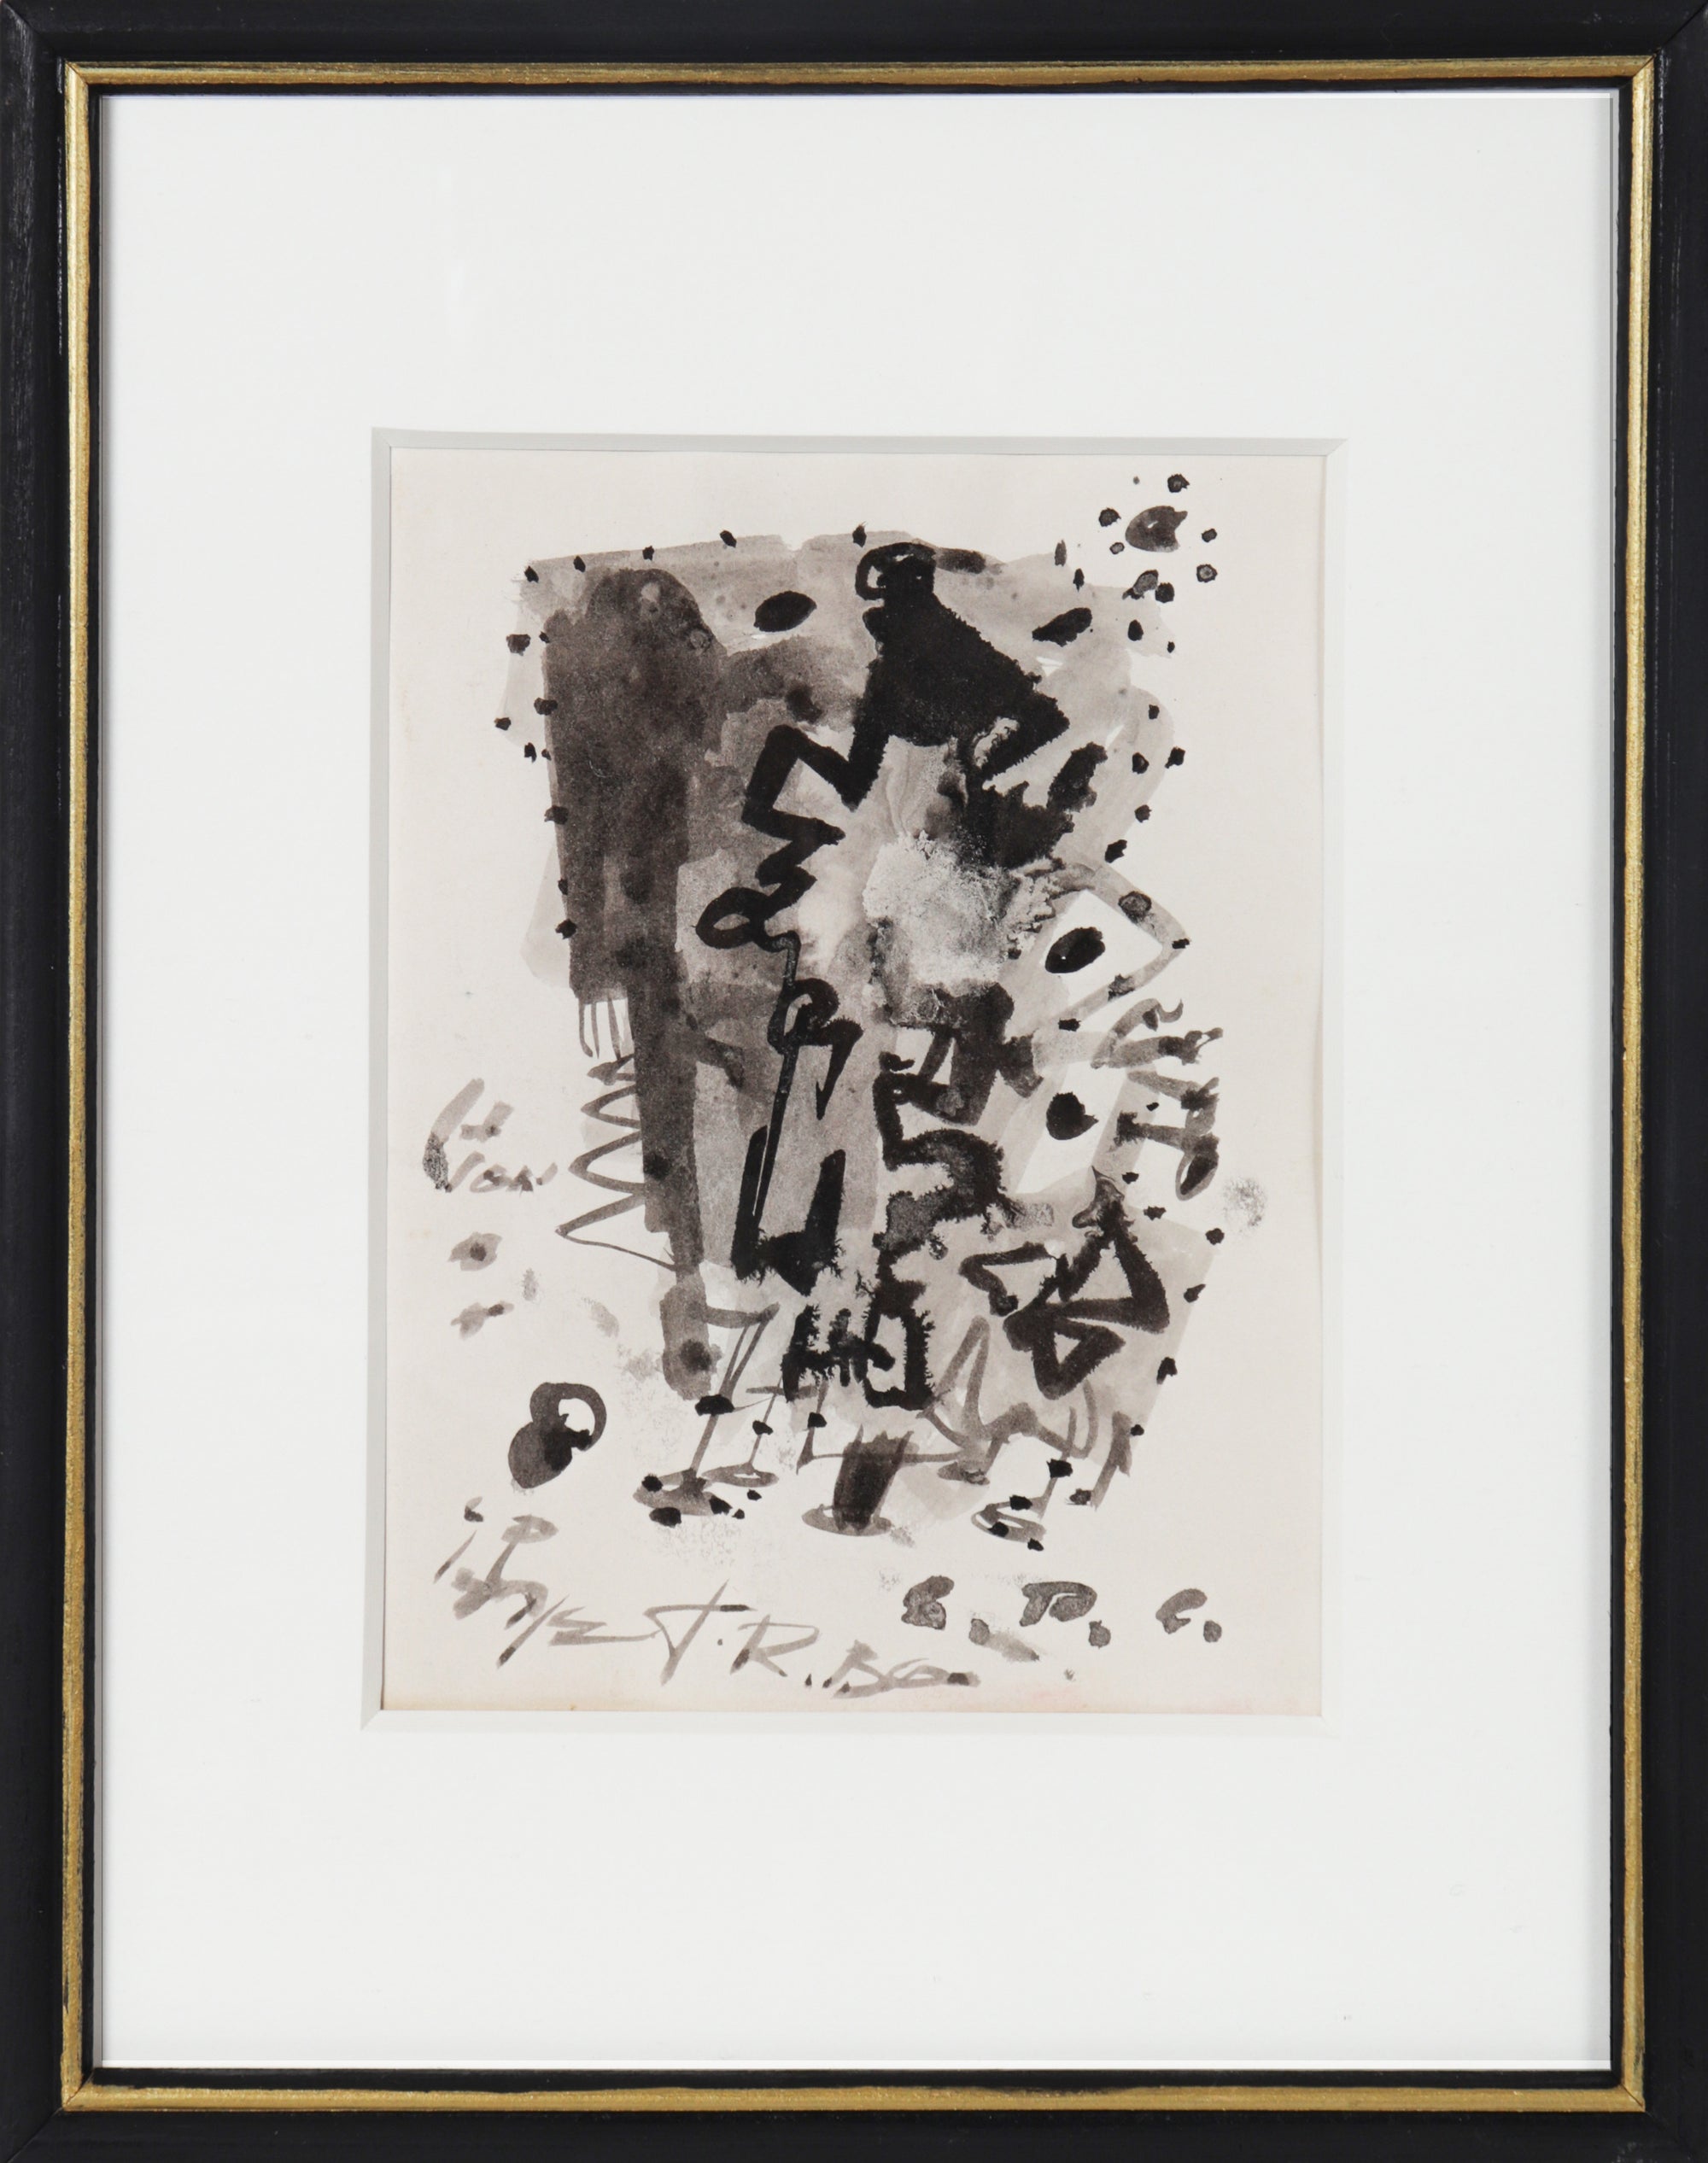 Deconstructed Monochromatic Abstraction <br>1966 Ink <br><br>#14795